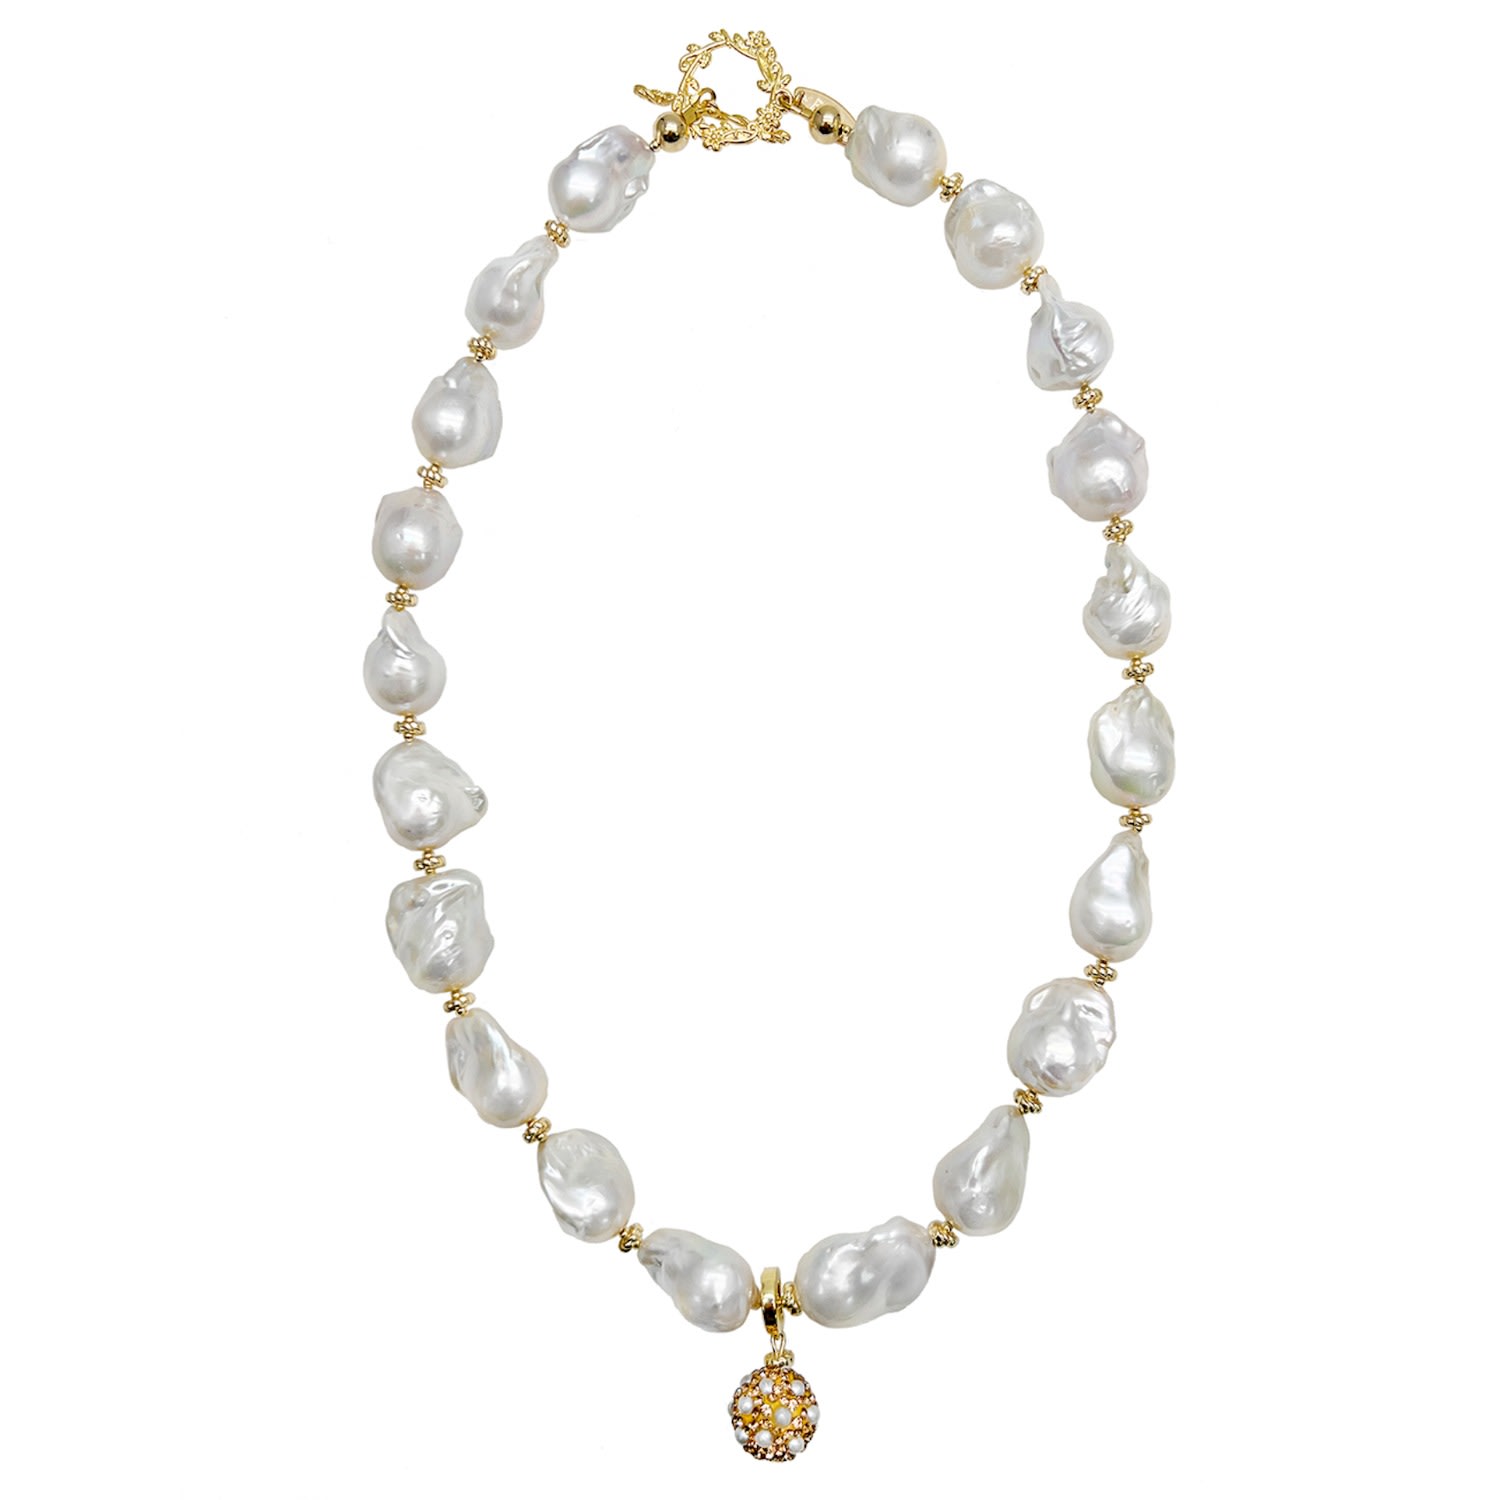 Women’s White Baroque Pearls With Removable Rhinestone Pendant Necklace Farra